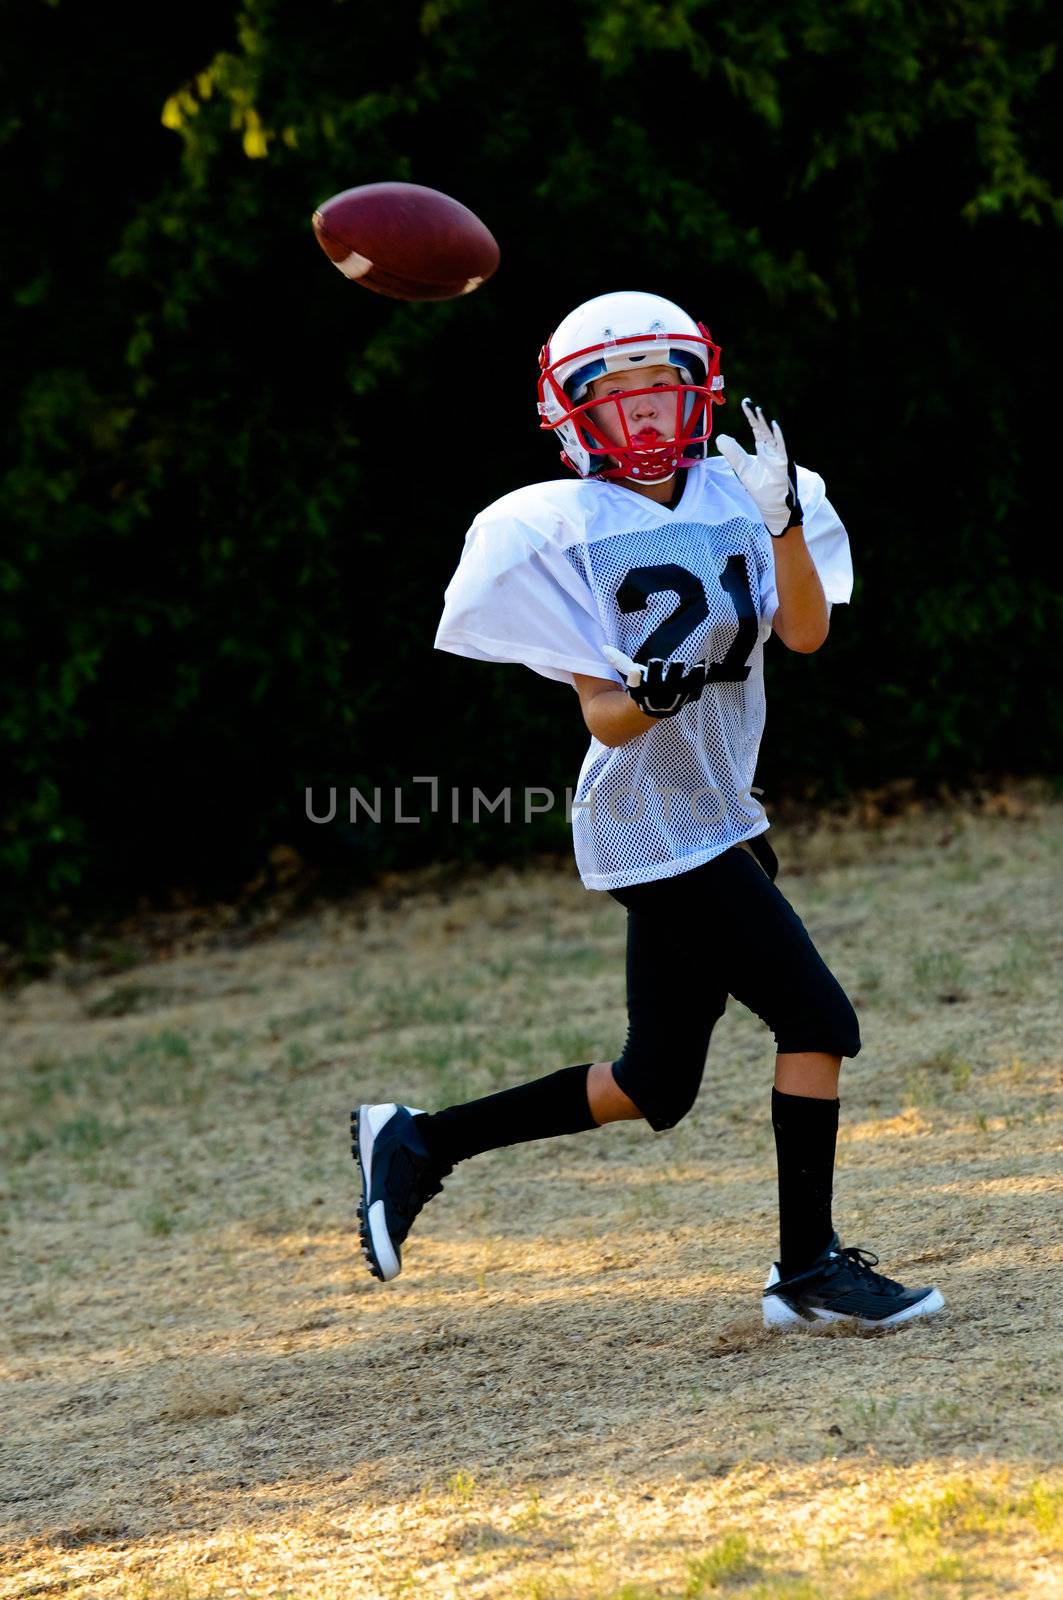 Young football player about to catch the football.